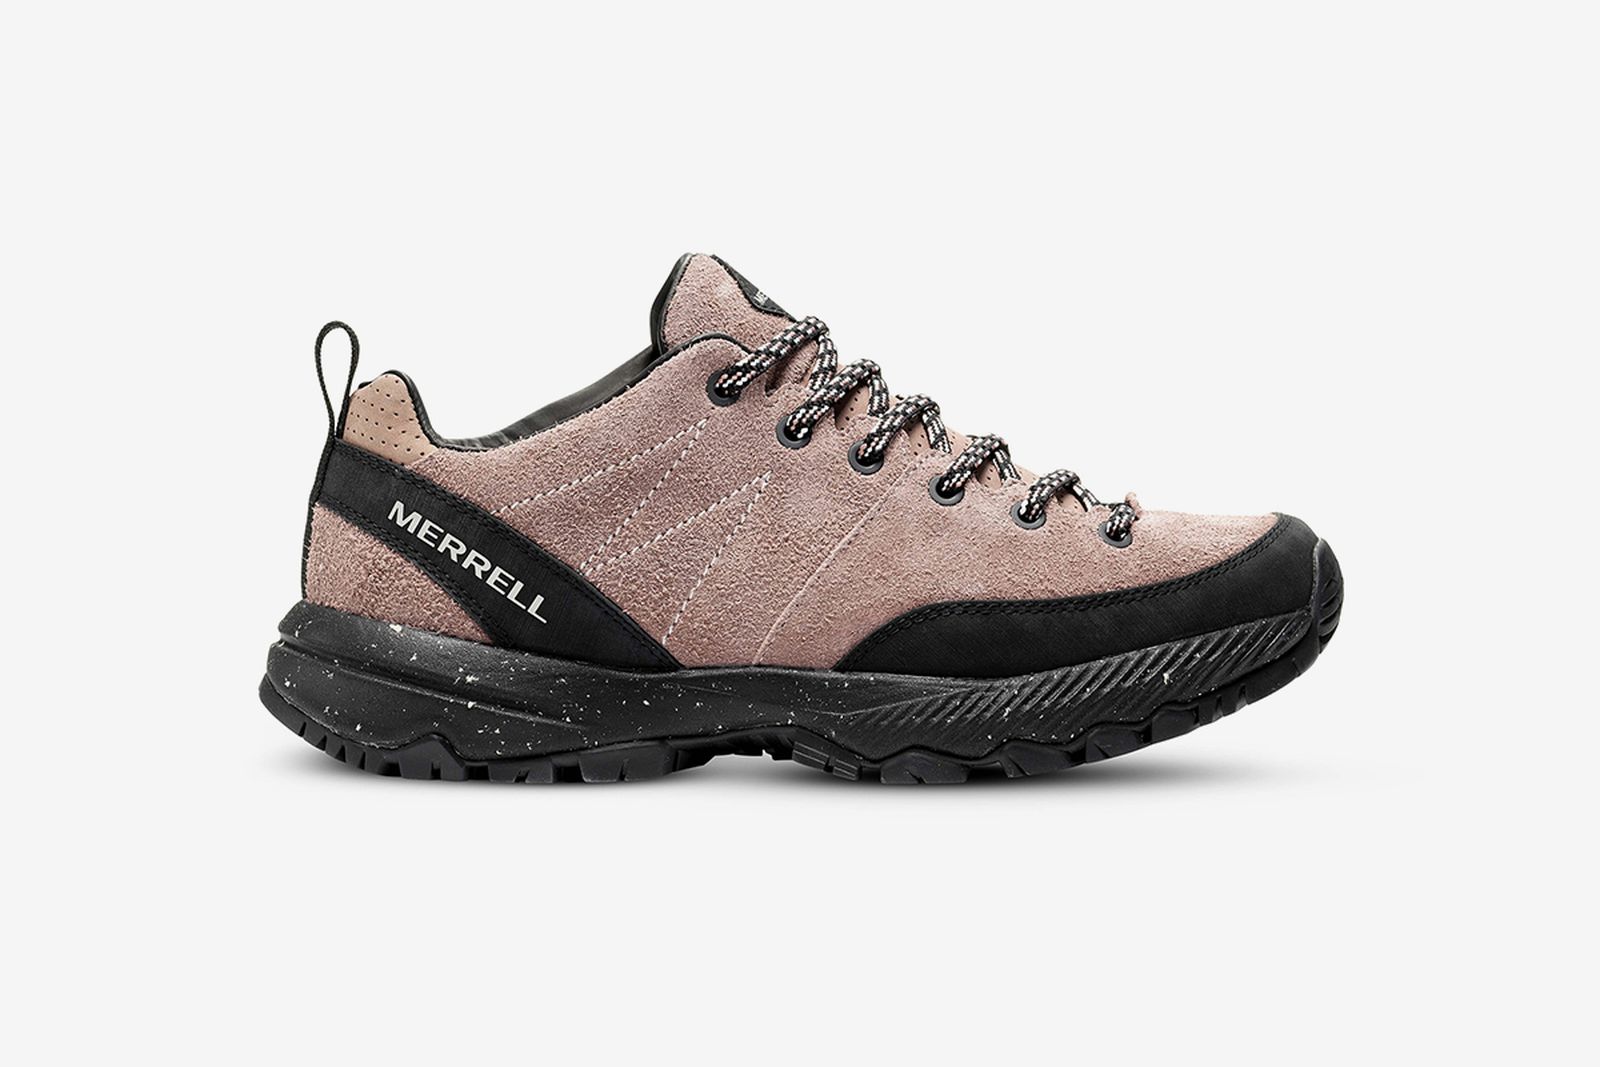 merrell-ss21-1trl-collection-07